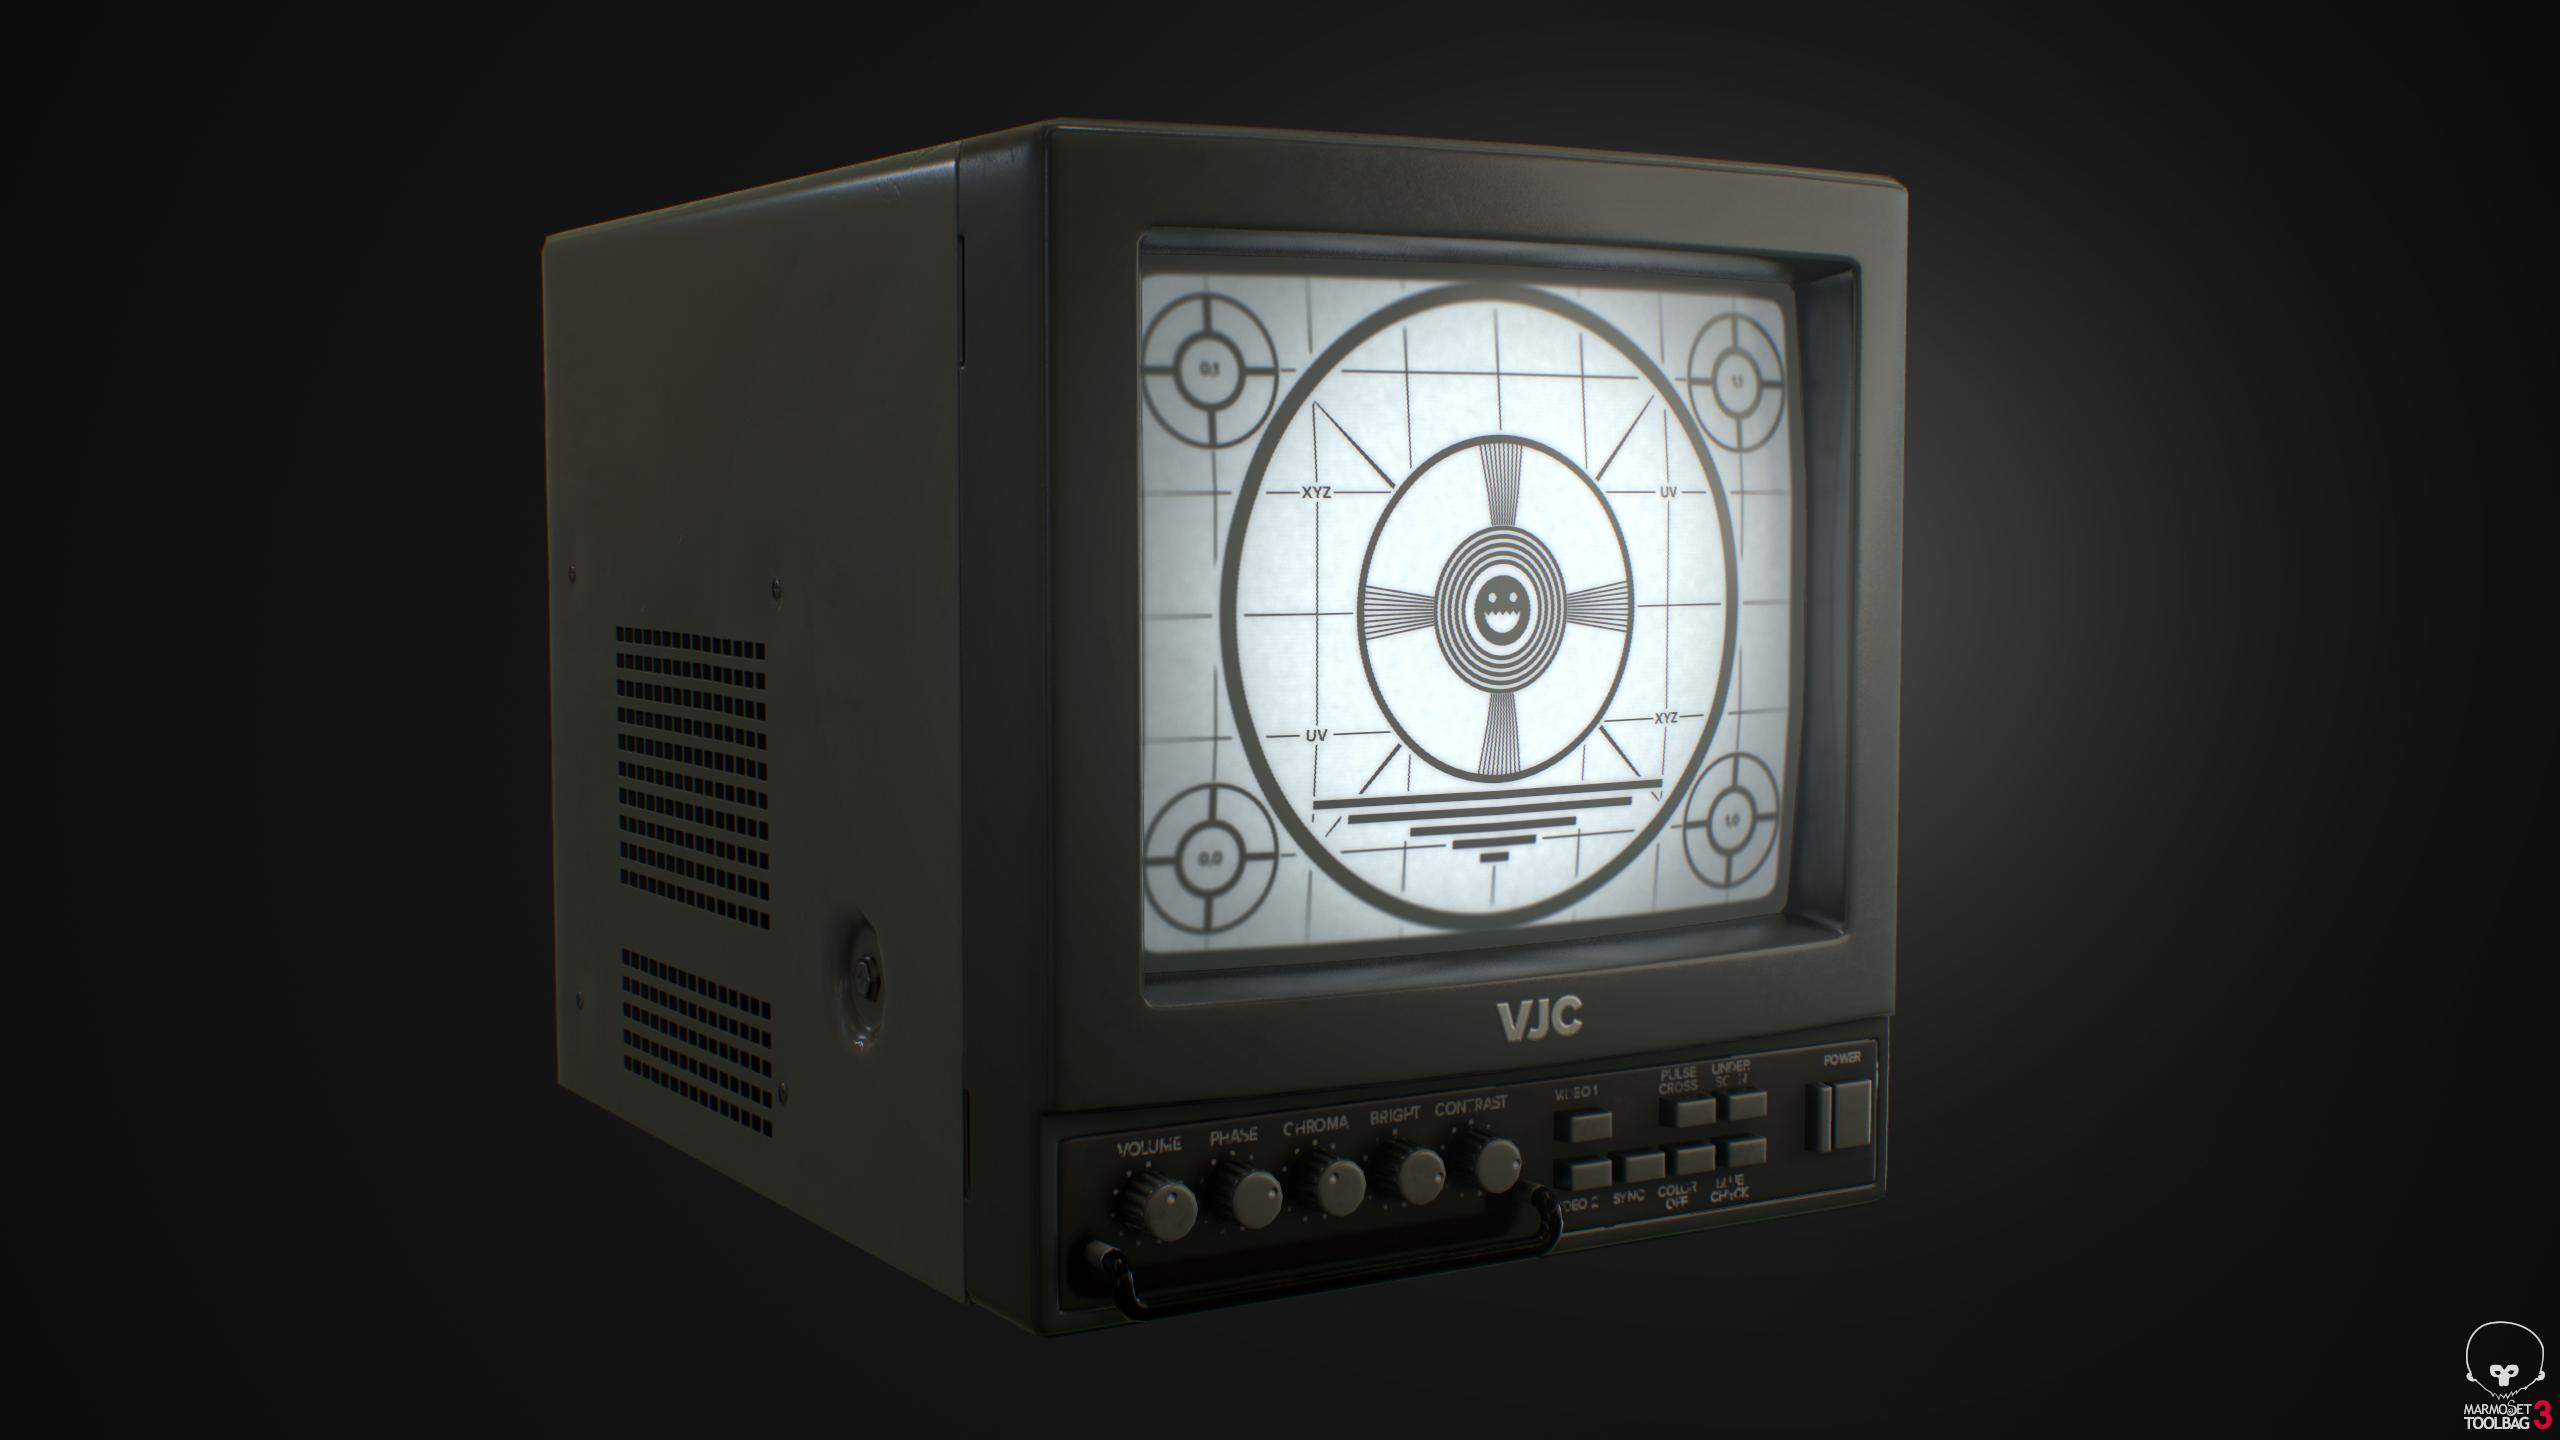 Render of a cctv monitor front